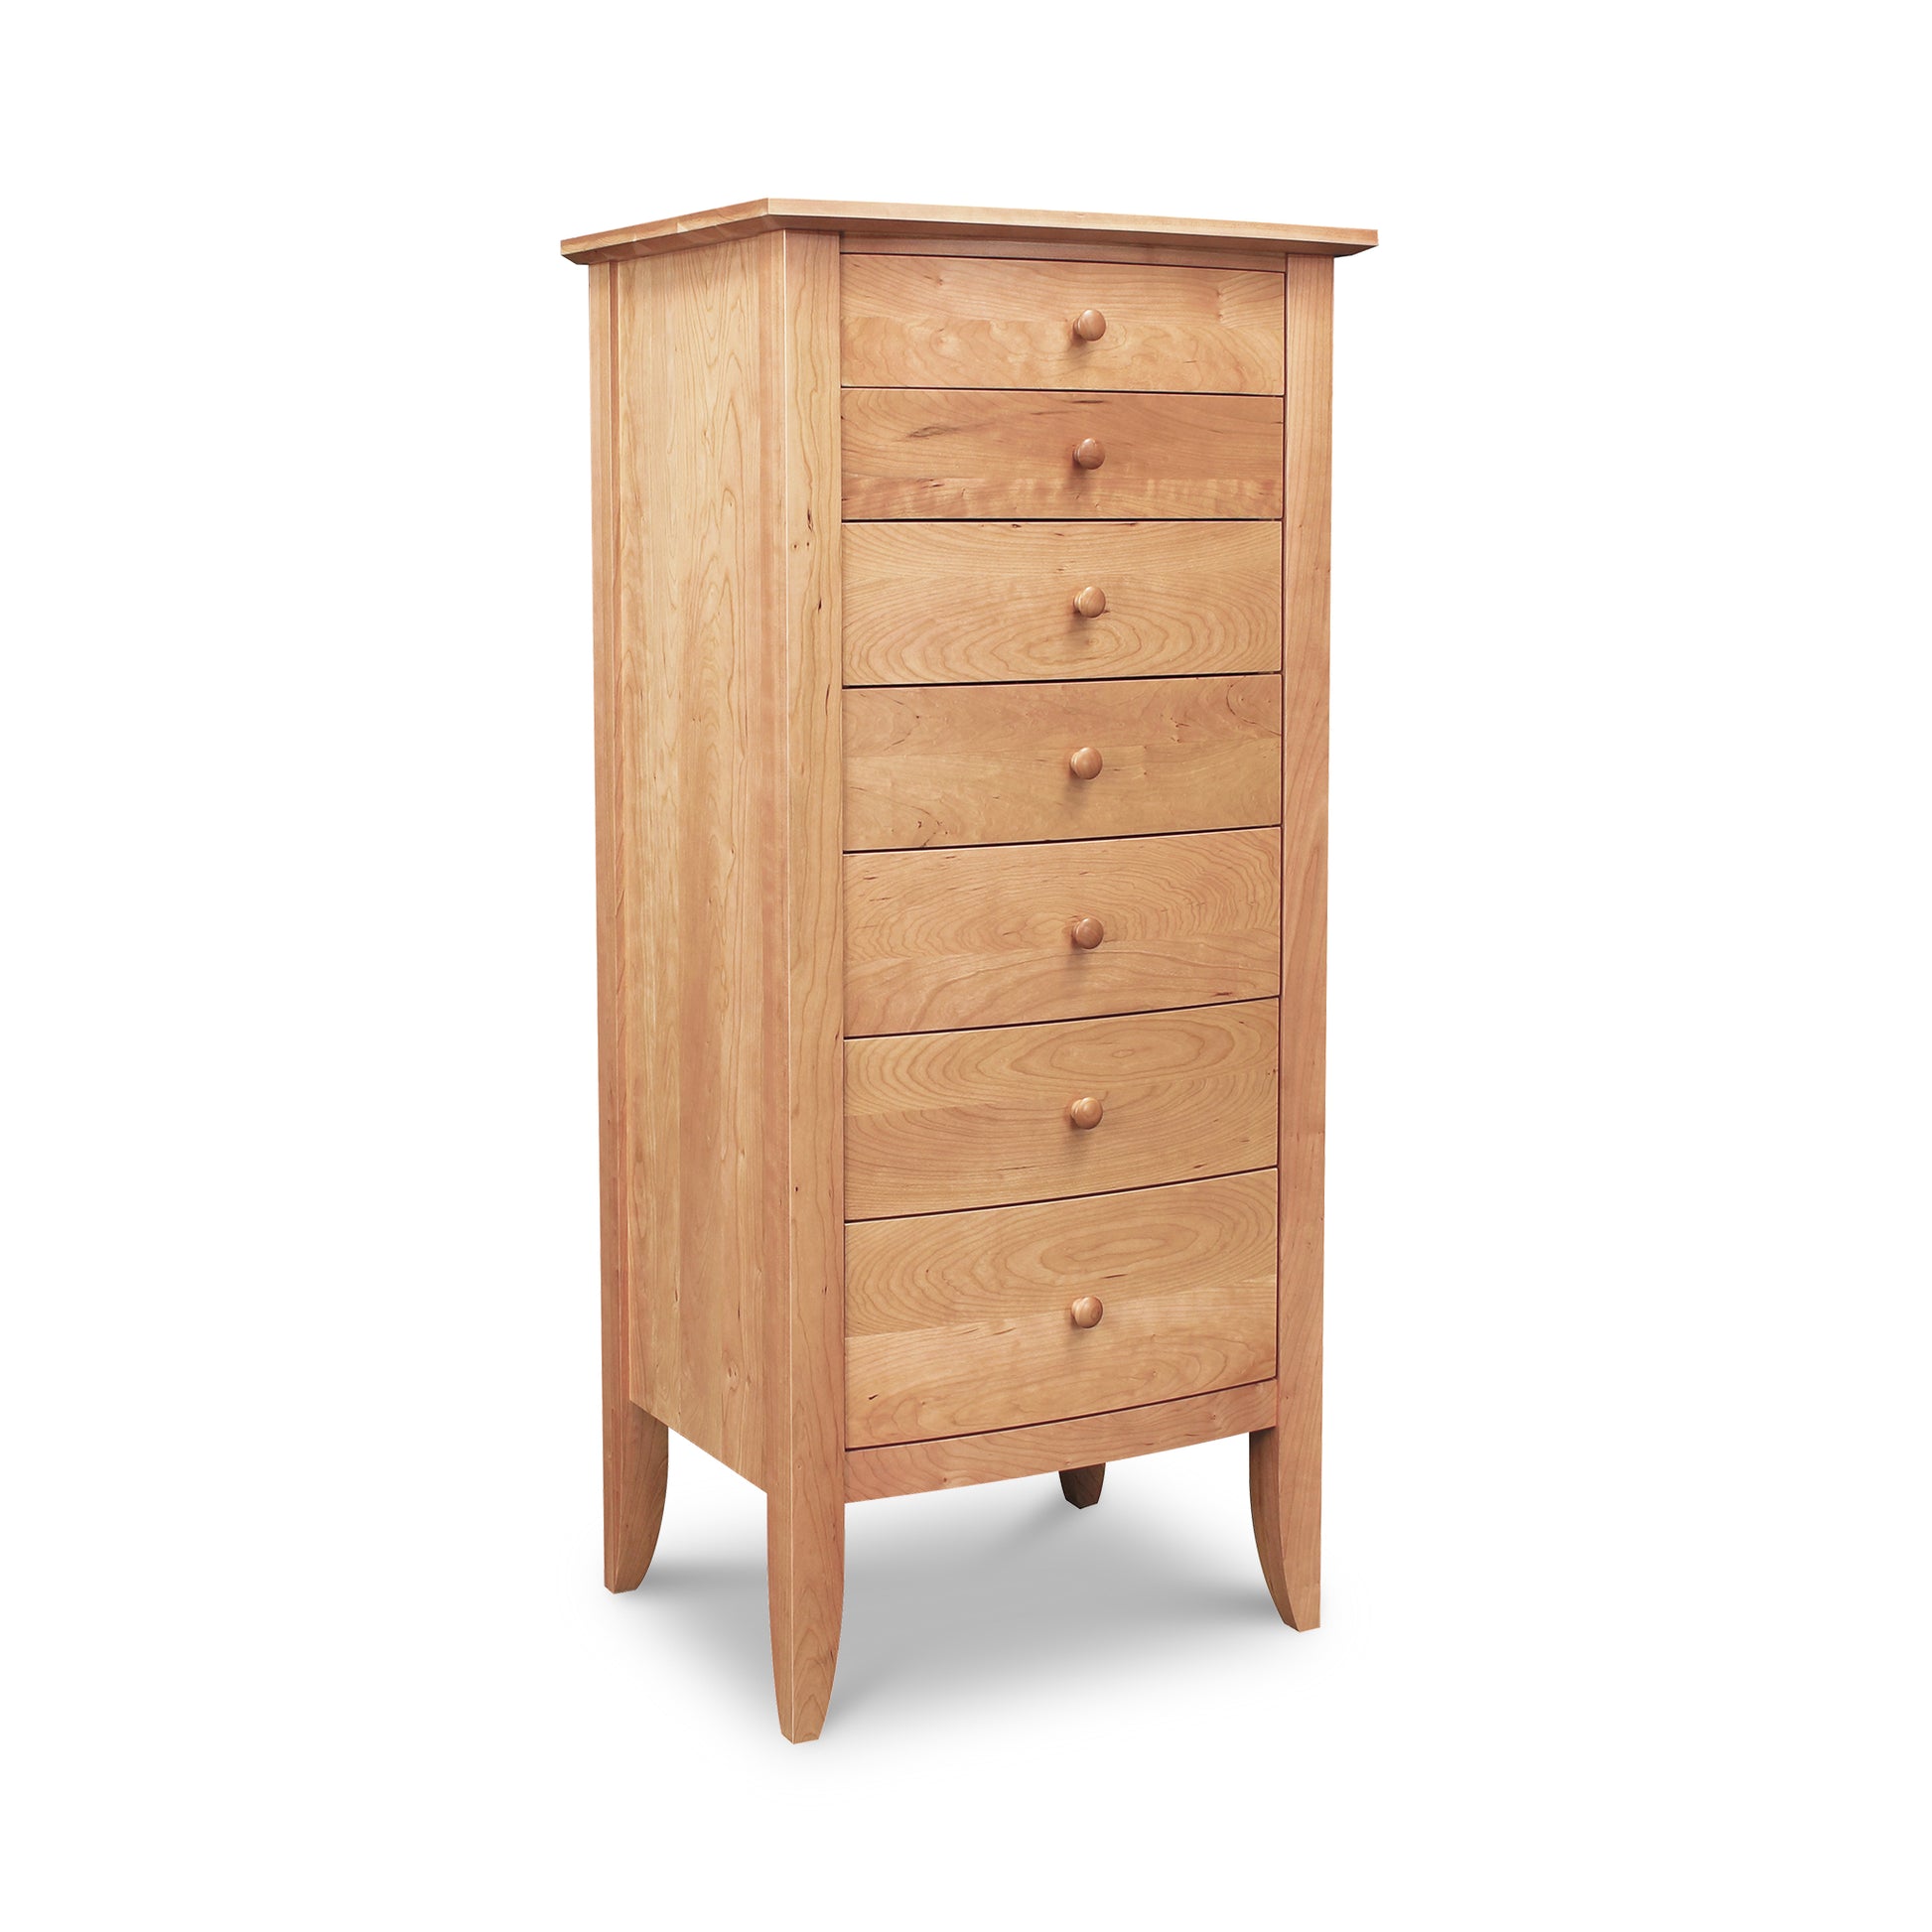 A customizable Bow Front 7-Drawer Lingerie Chest made from hardwoods.